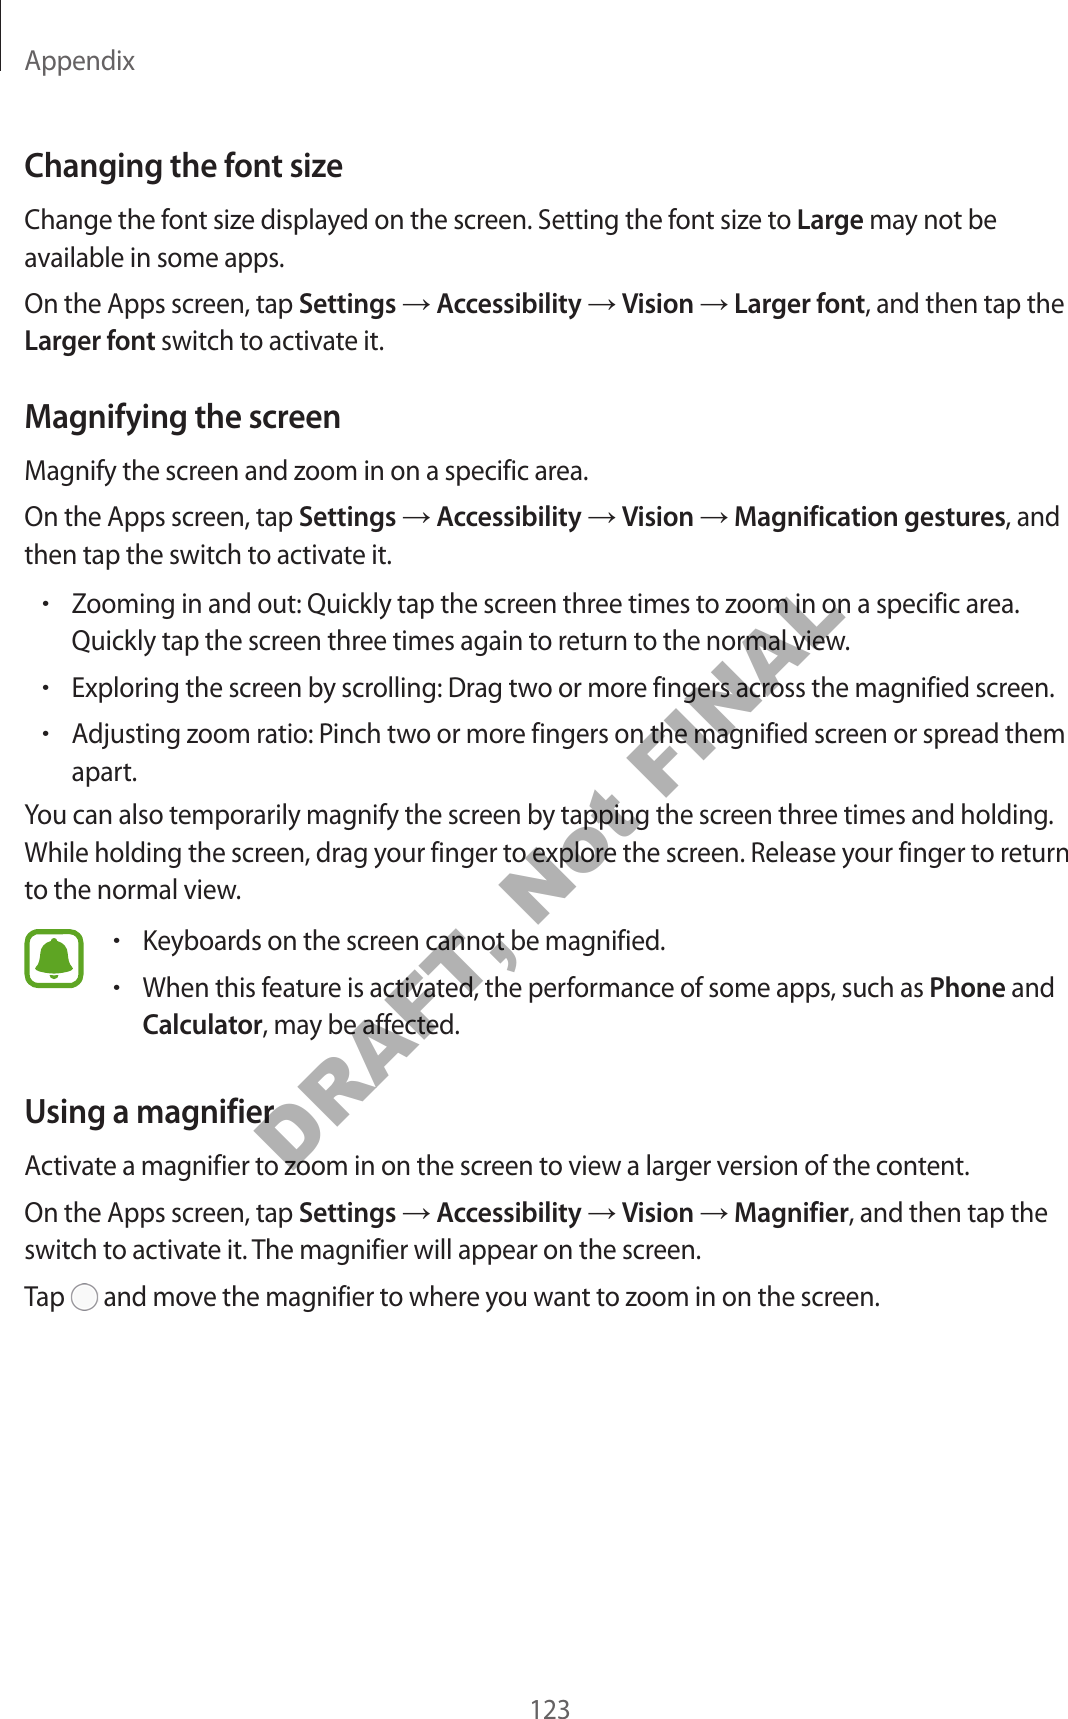 Appendix123Changing the font sizeChange the font size displayed on the screen. Setting the font size to Large may not be available in some apps.On the Apps screen, tap Settings  Accessibility  Vision  Larger font, and then tap the Larger font switch to activate it.Magnifying the screenMagnify the screen and zoom in on a specific area.On the Apps screen, tap Settings  Accessibility  Vision  Magnification gestures, and then tap the switch to activate it.•Zooming in and out: Quickly tap the screen three times to zoom in on a specific area.Quickly tap the screen three times again to return to the normal view.•Exploring the screen by scrolling: Drag two or more fingers across the magnified screen.•Adjusting zoom ratio: Pinch two or more fingers on the magnified screen or spread themapart.You can also temporarily magnify the screen by tapping the screen three times and holding. While holding the screen, drag your finger to explore the screen. Release your finger to return to the normal view.•Keyboards on the screen cannot be magnified.•When this feature is activated, the performance of some apps, such as Phone andCalculator, may be affected.Using a magnifierActivate a magnifier to zoom in on the screen to view a larger version of the content.On the Apps screen, tap Settings  Accessibility  Vision  Magnifier, and then tap the switch to activate it. The magnifier will appear on the screen.Tap   and move the magnifier to where you want to zoom in on the screen.DRAFT, Not FINAL